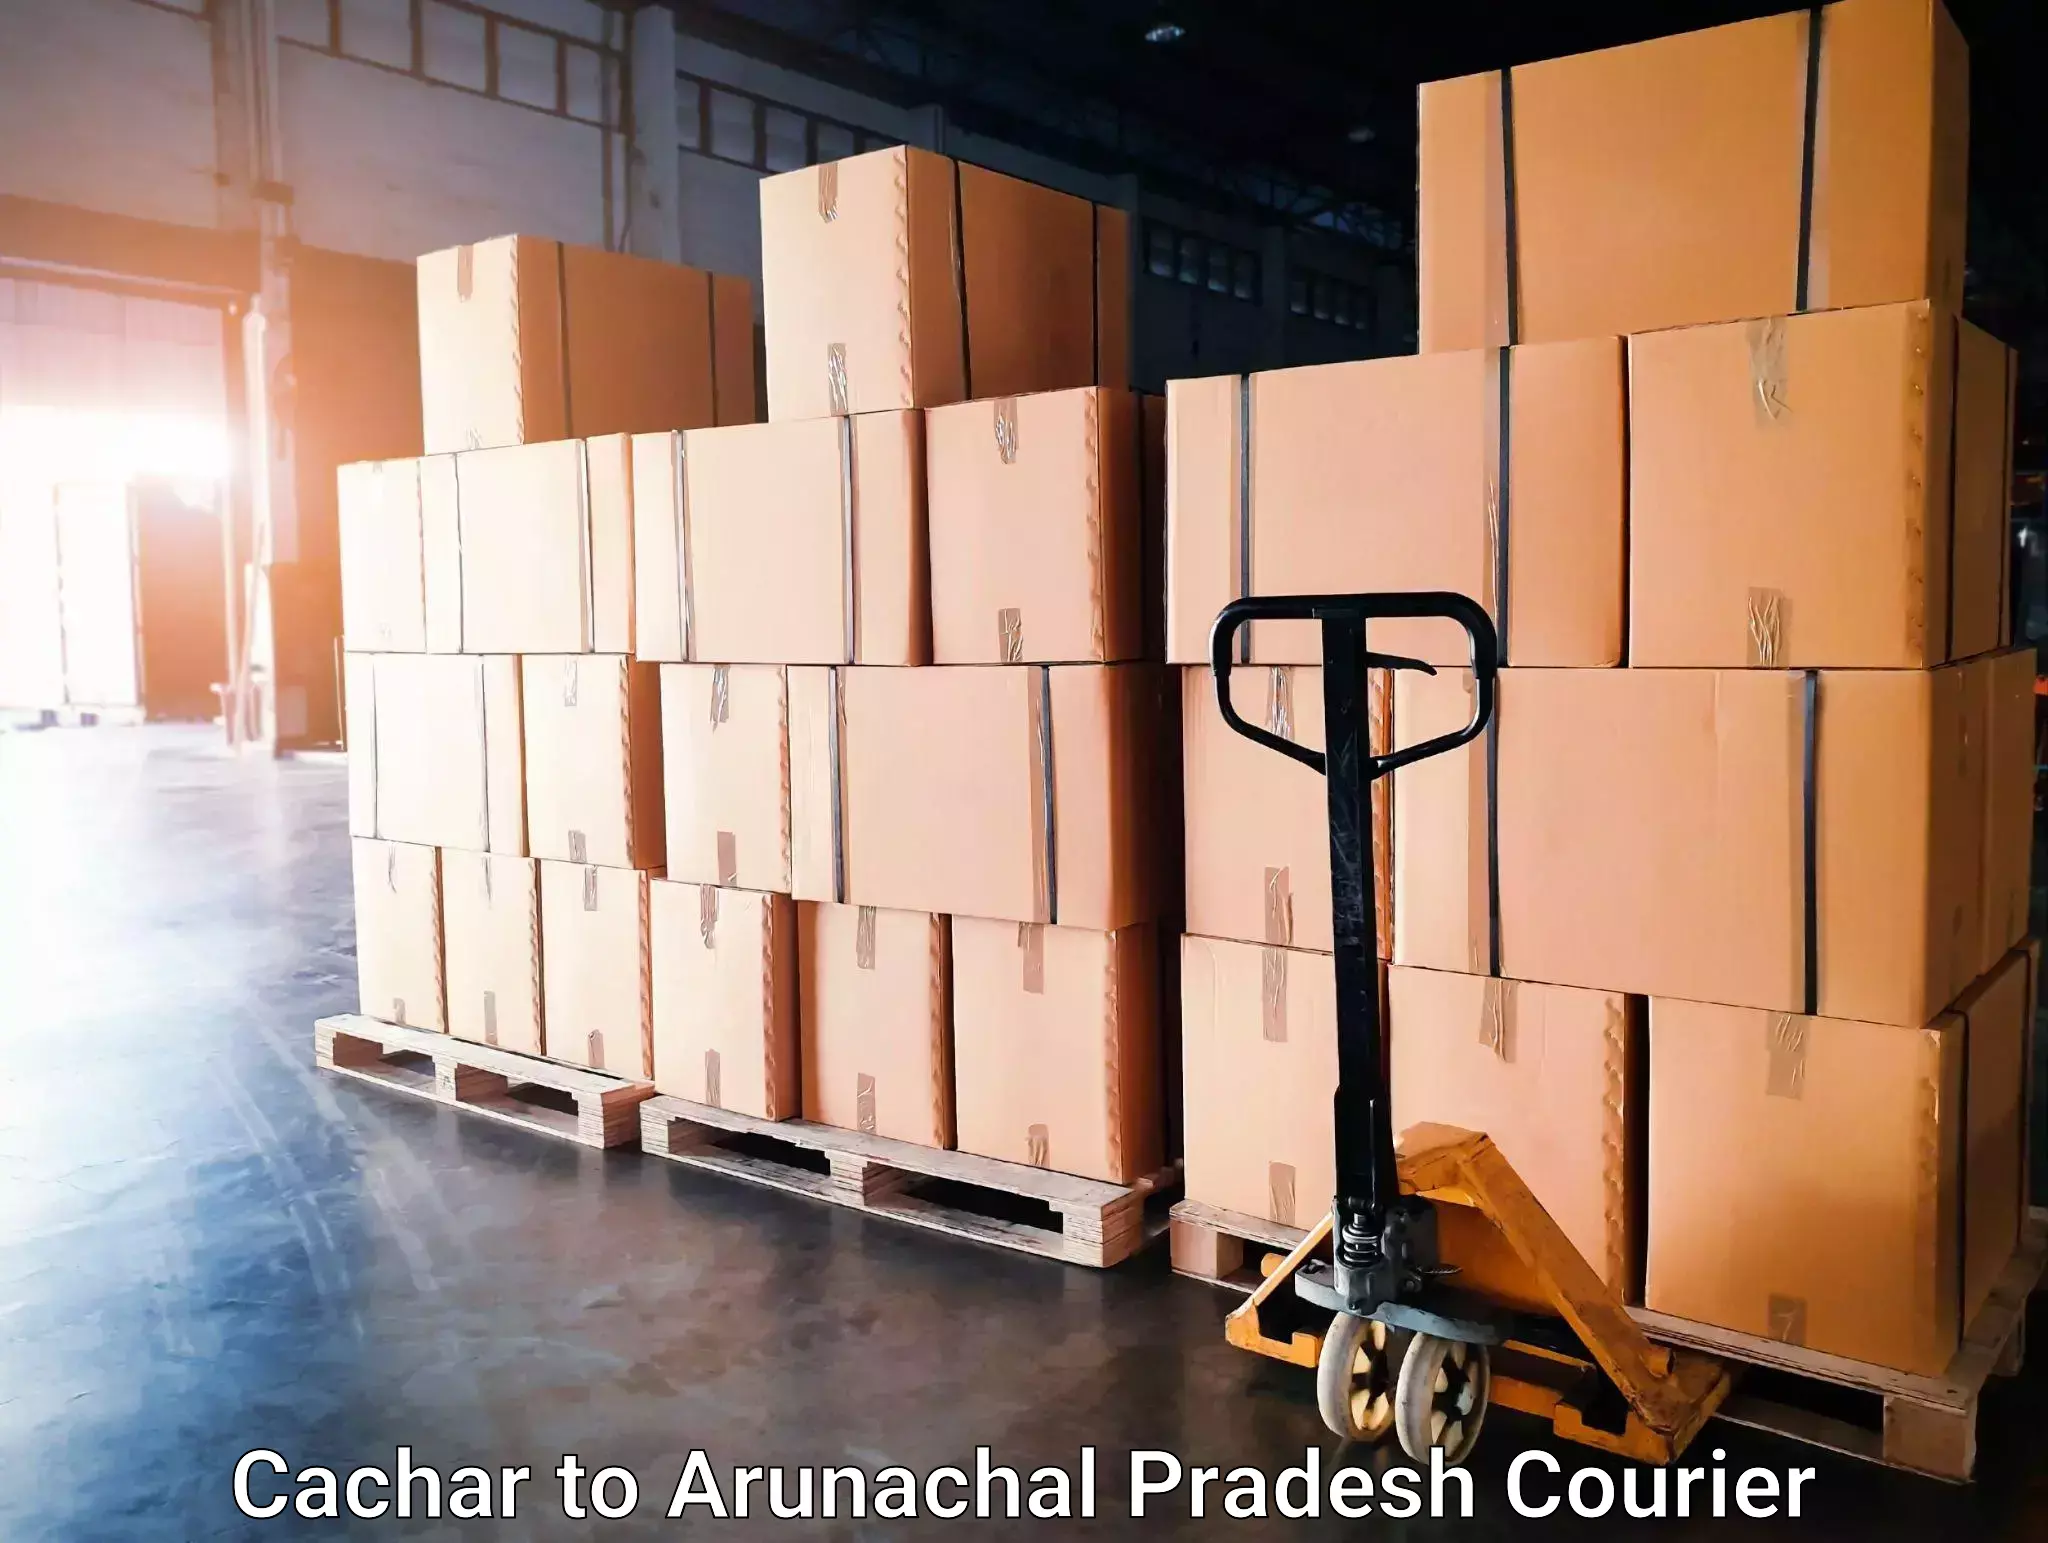 Global freight services Cachar to Deomali